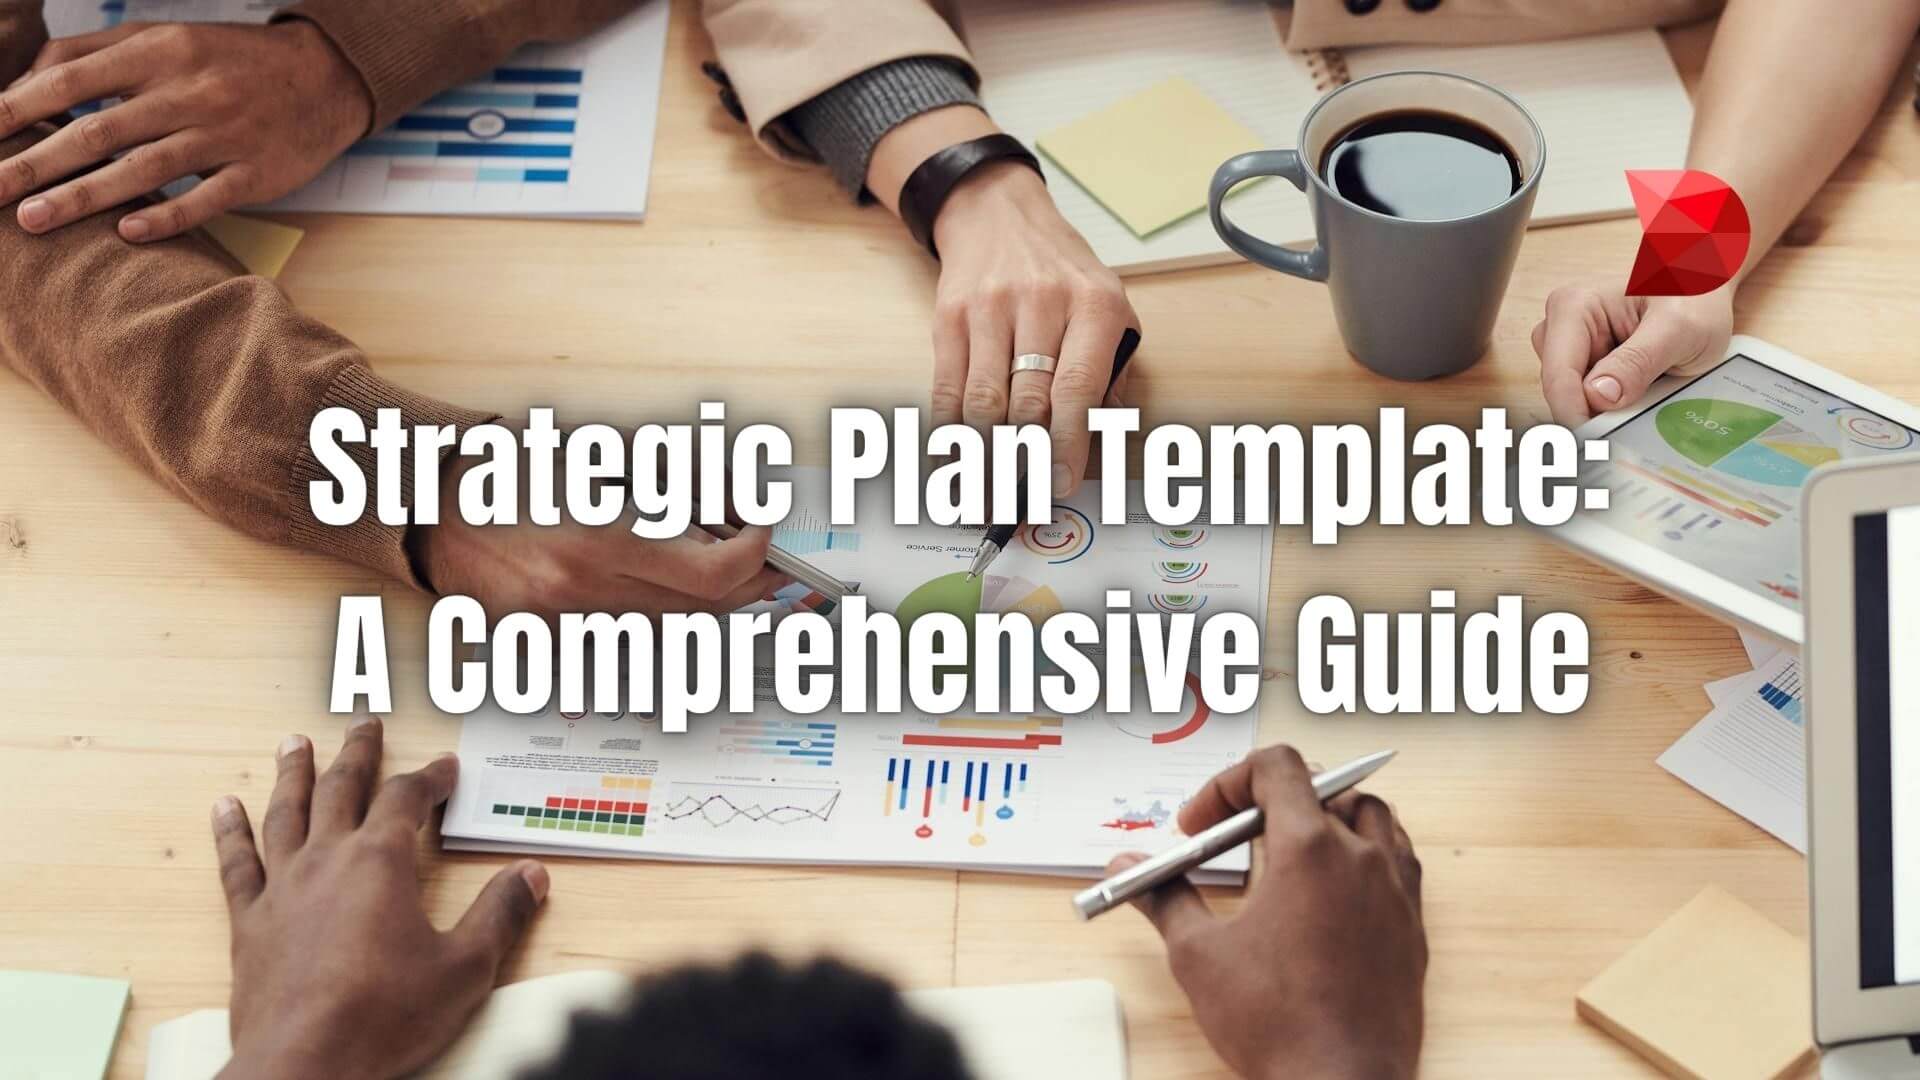 Unlock your organization's full potential! Click here to make strategic planning a breeze with our guide to Strategic Plan Template.